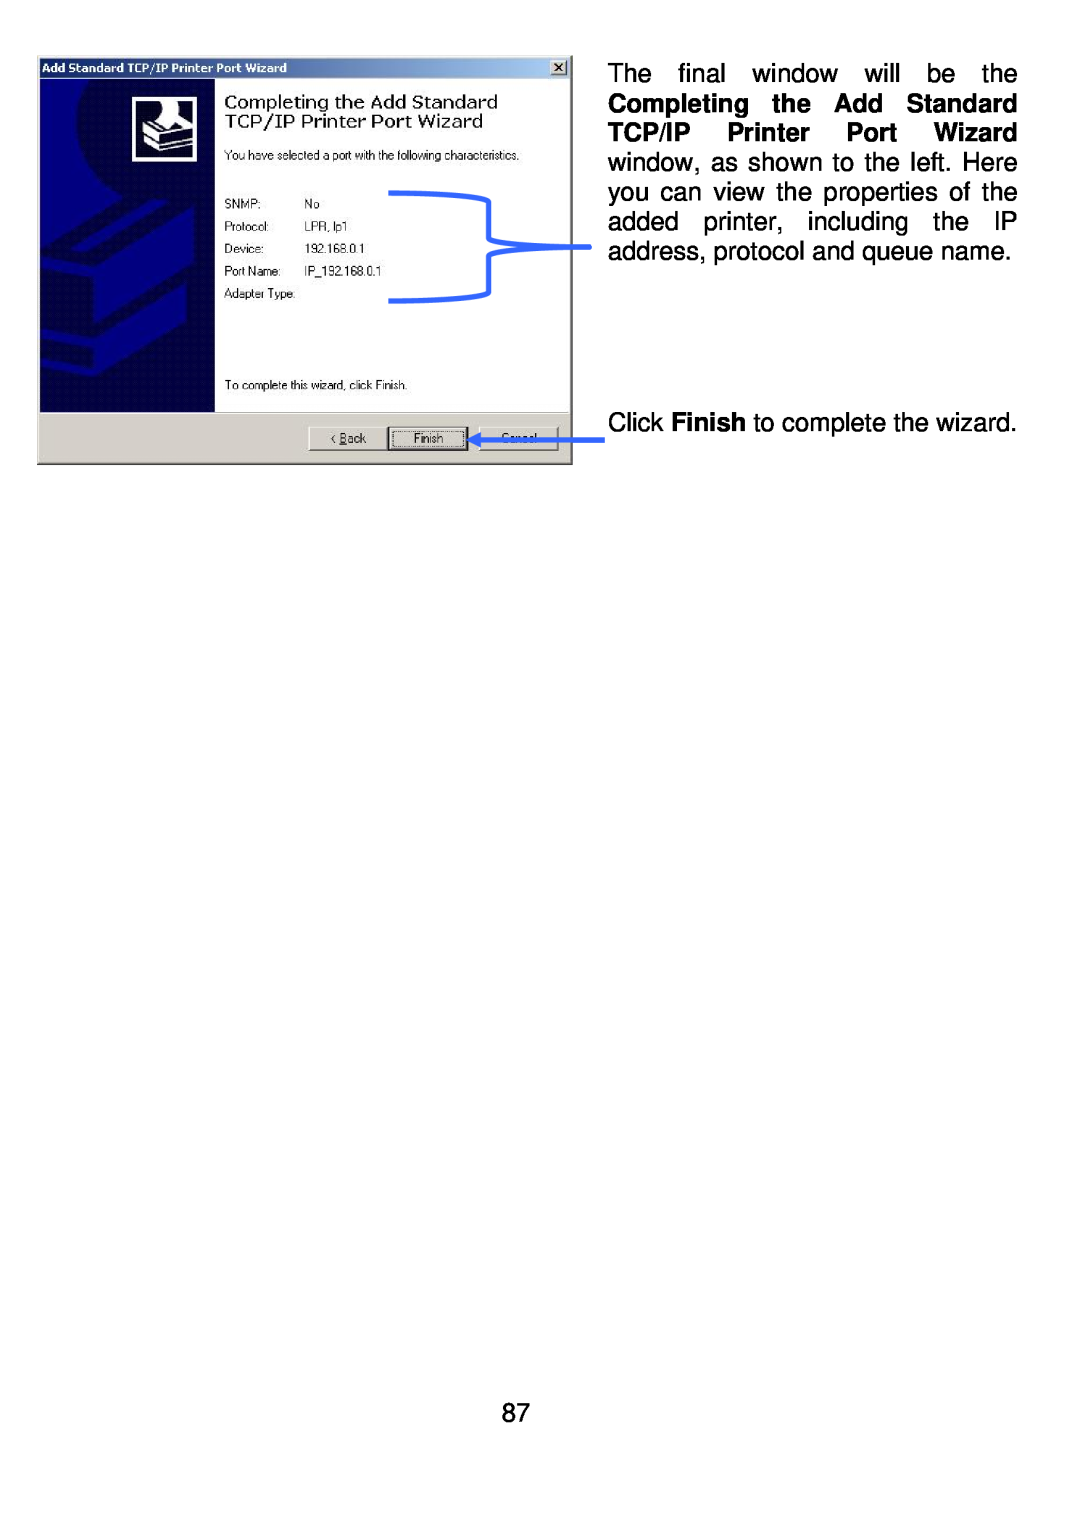 D-Link DI-524UP manual The final window will be the, Click Finish to complete the wizard 